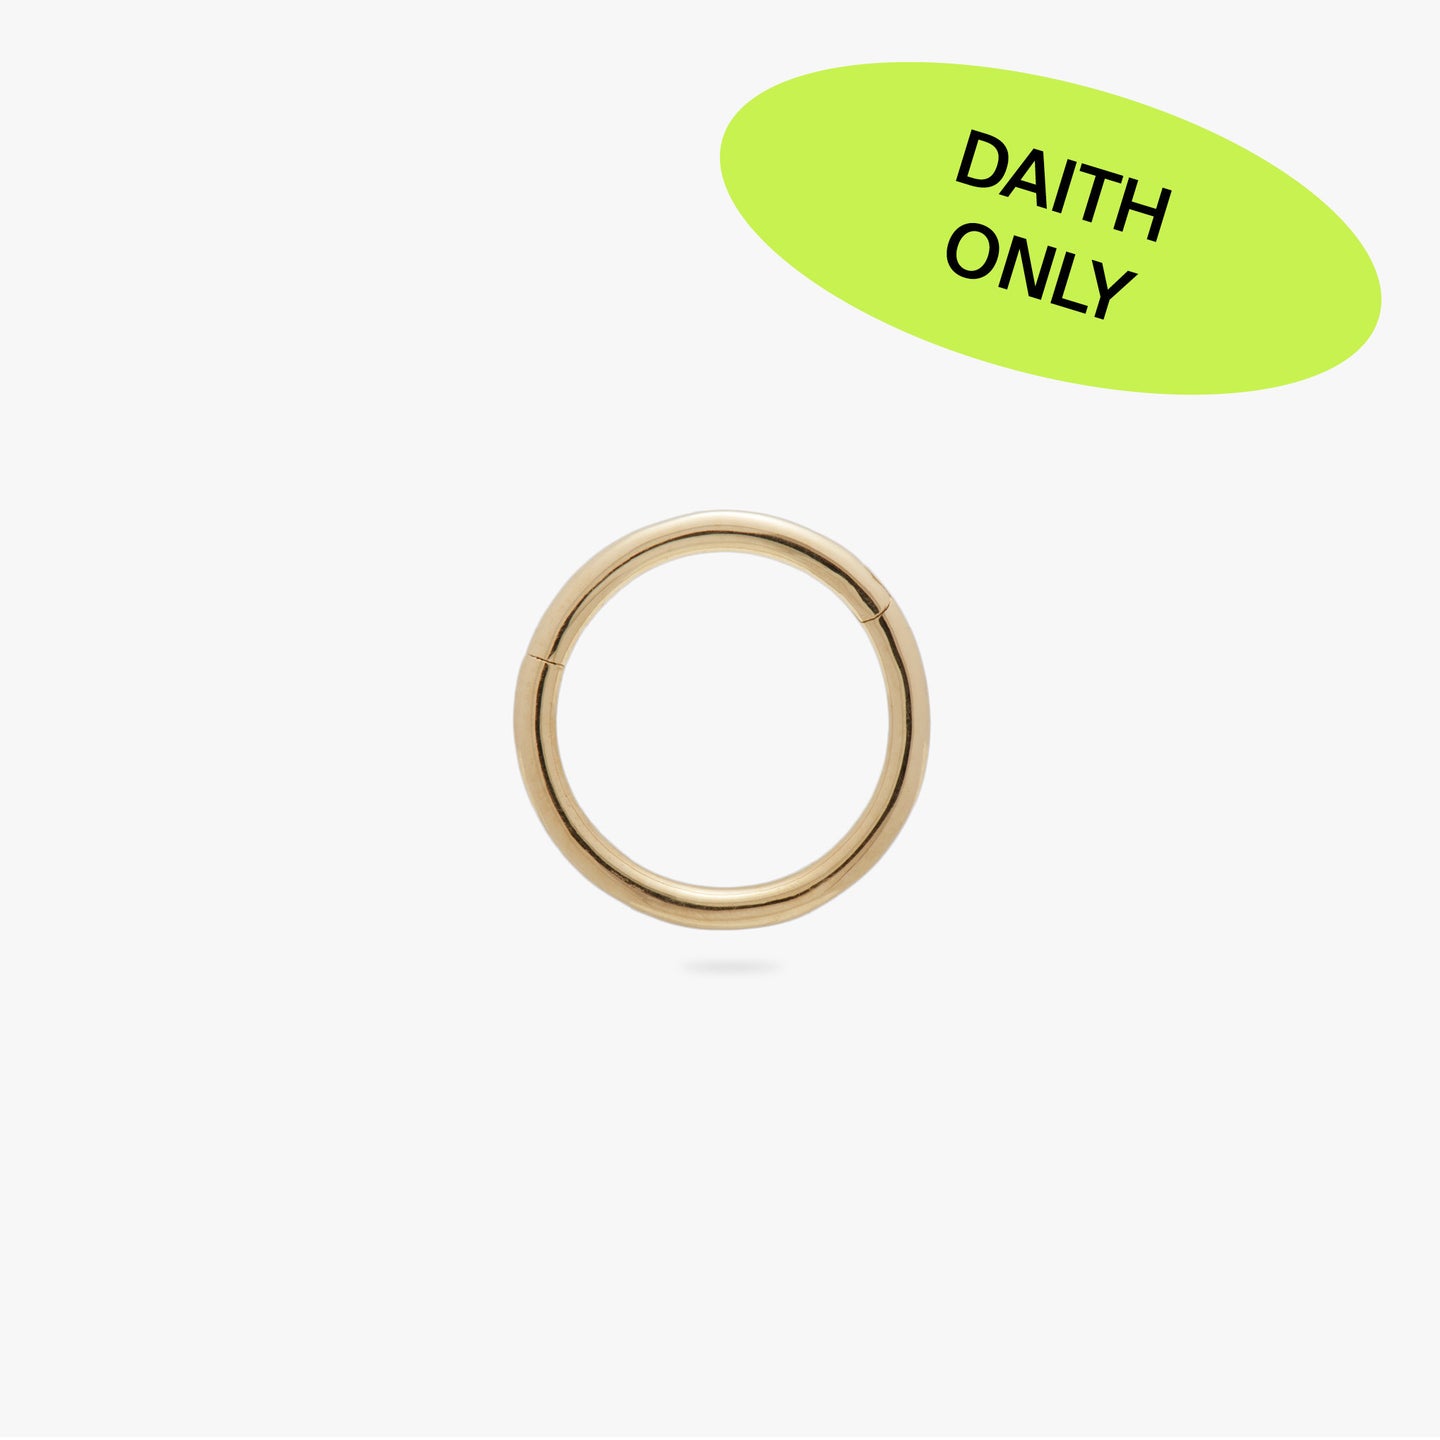 This is a gold clicker earring color:null|gold